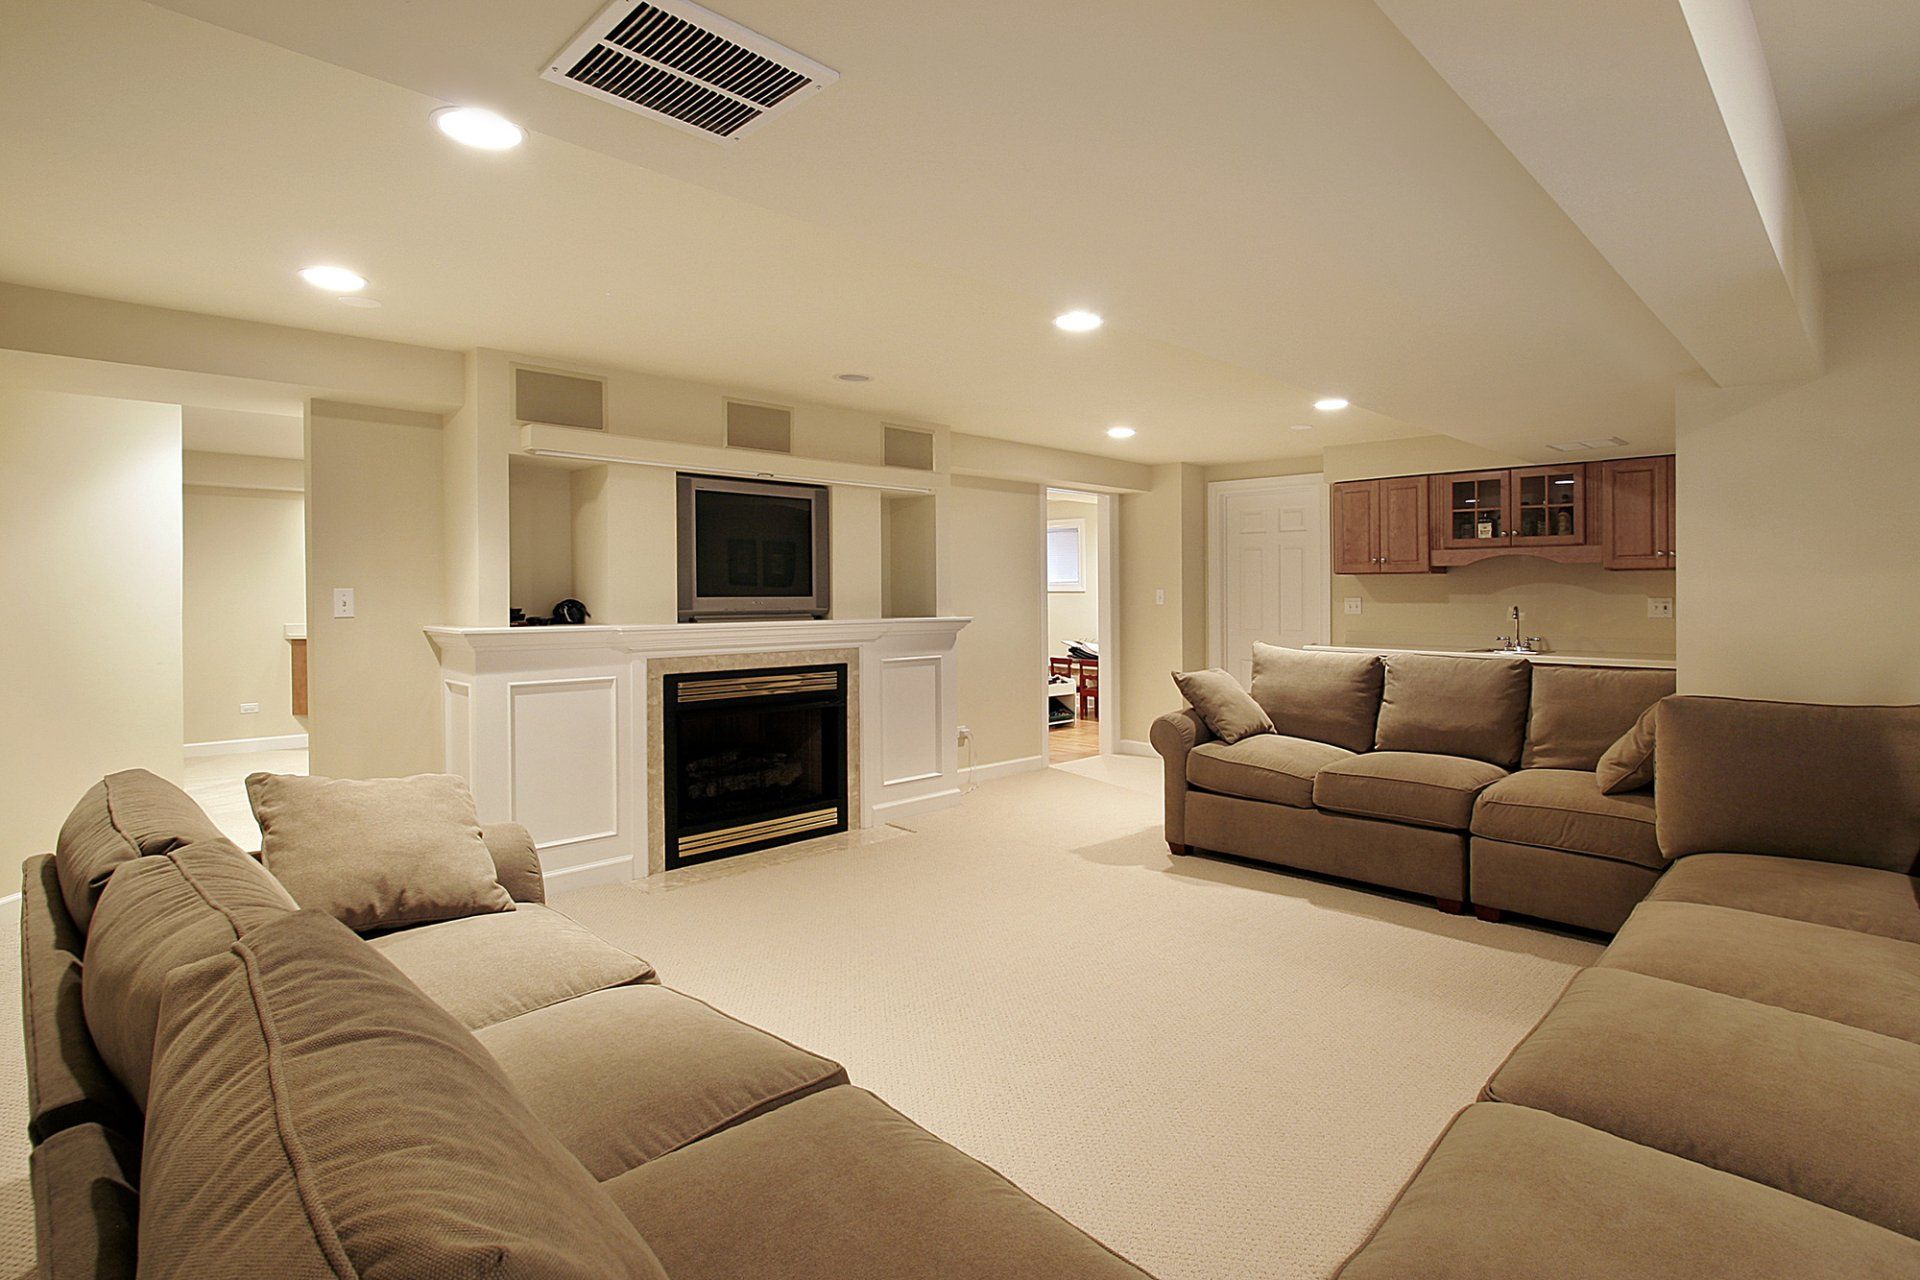 Basement Remodeling in Florence, KY | Mark Deming and Sons Renovations